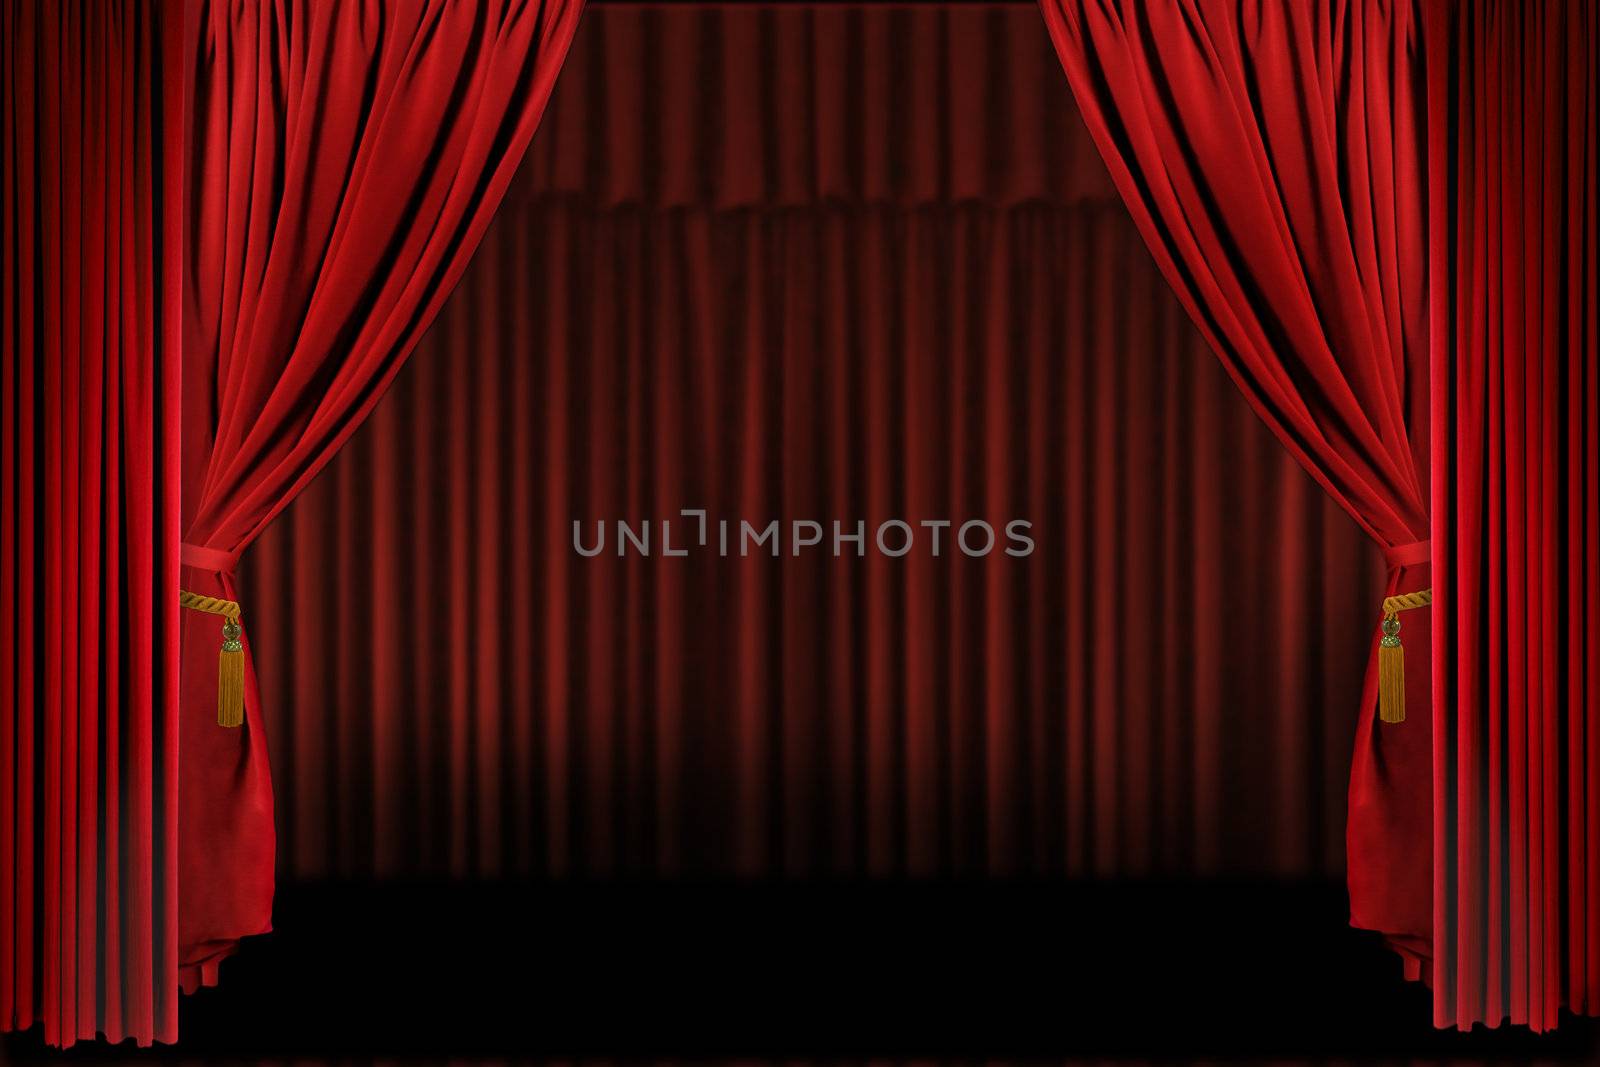 Horizontal Stage Drapes Open For Presentation. Insert Your Own Text or Image